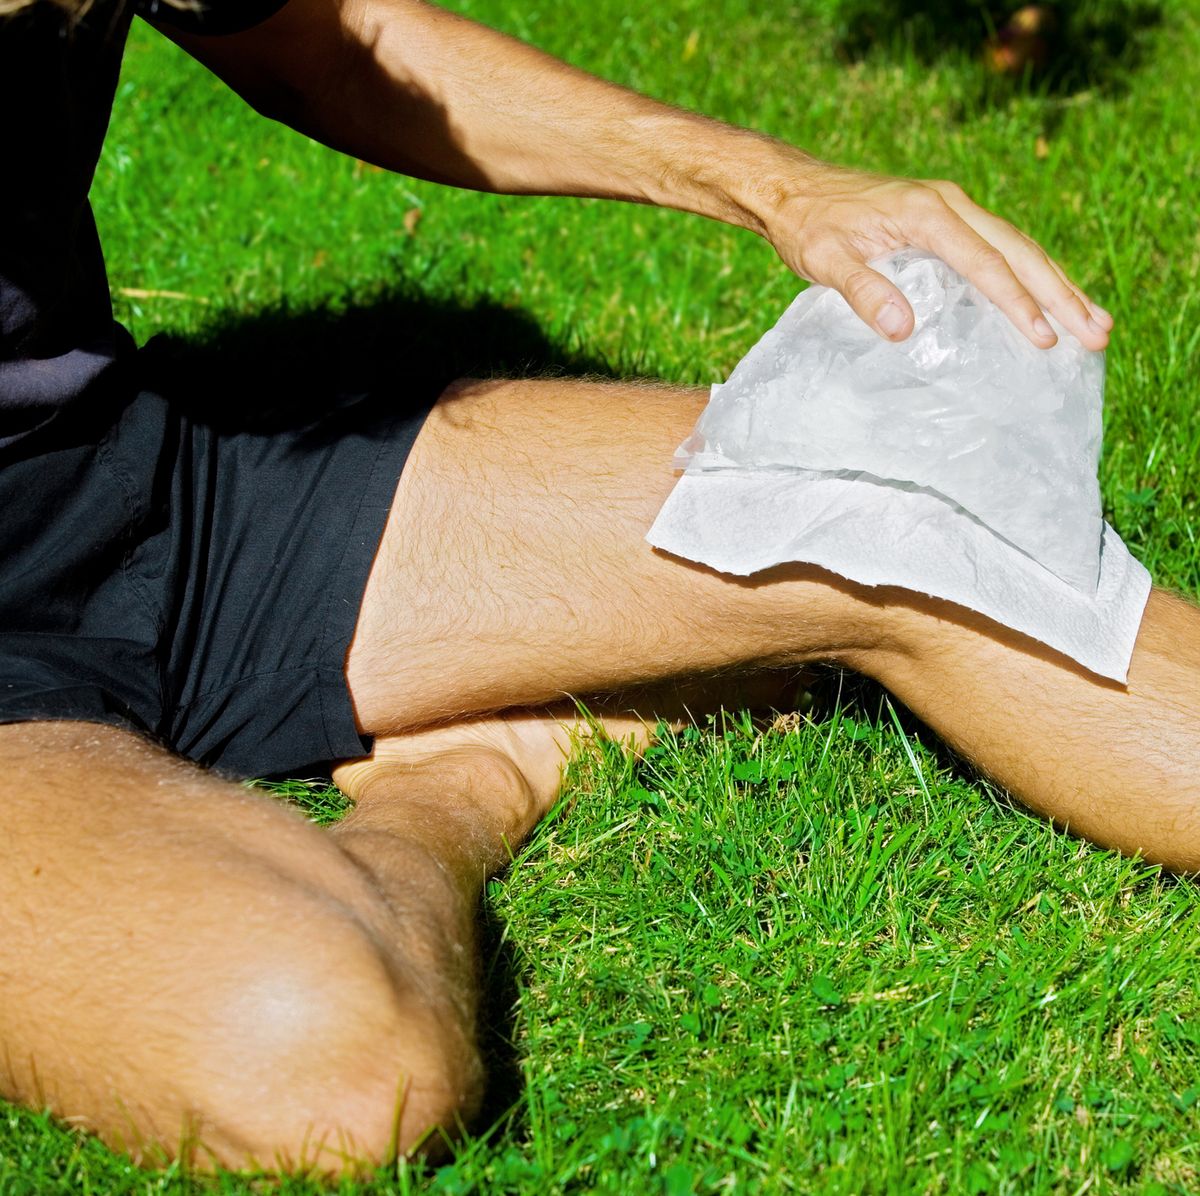 The Truth About Using Ice vs Heat for Running Injuries [Video]